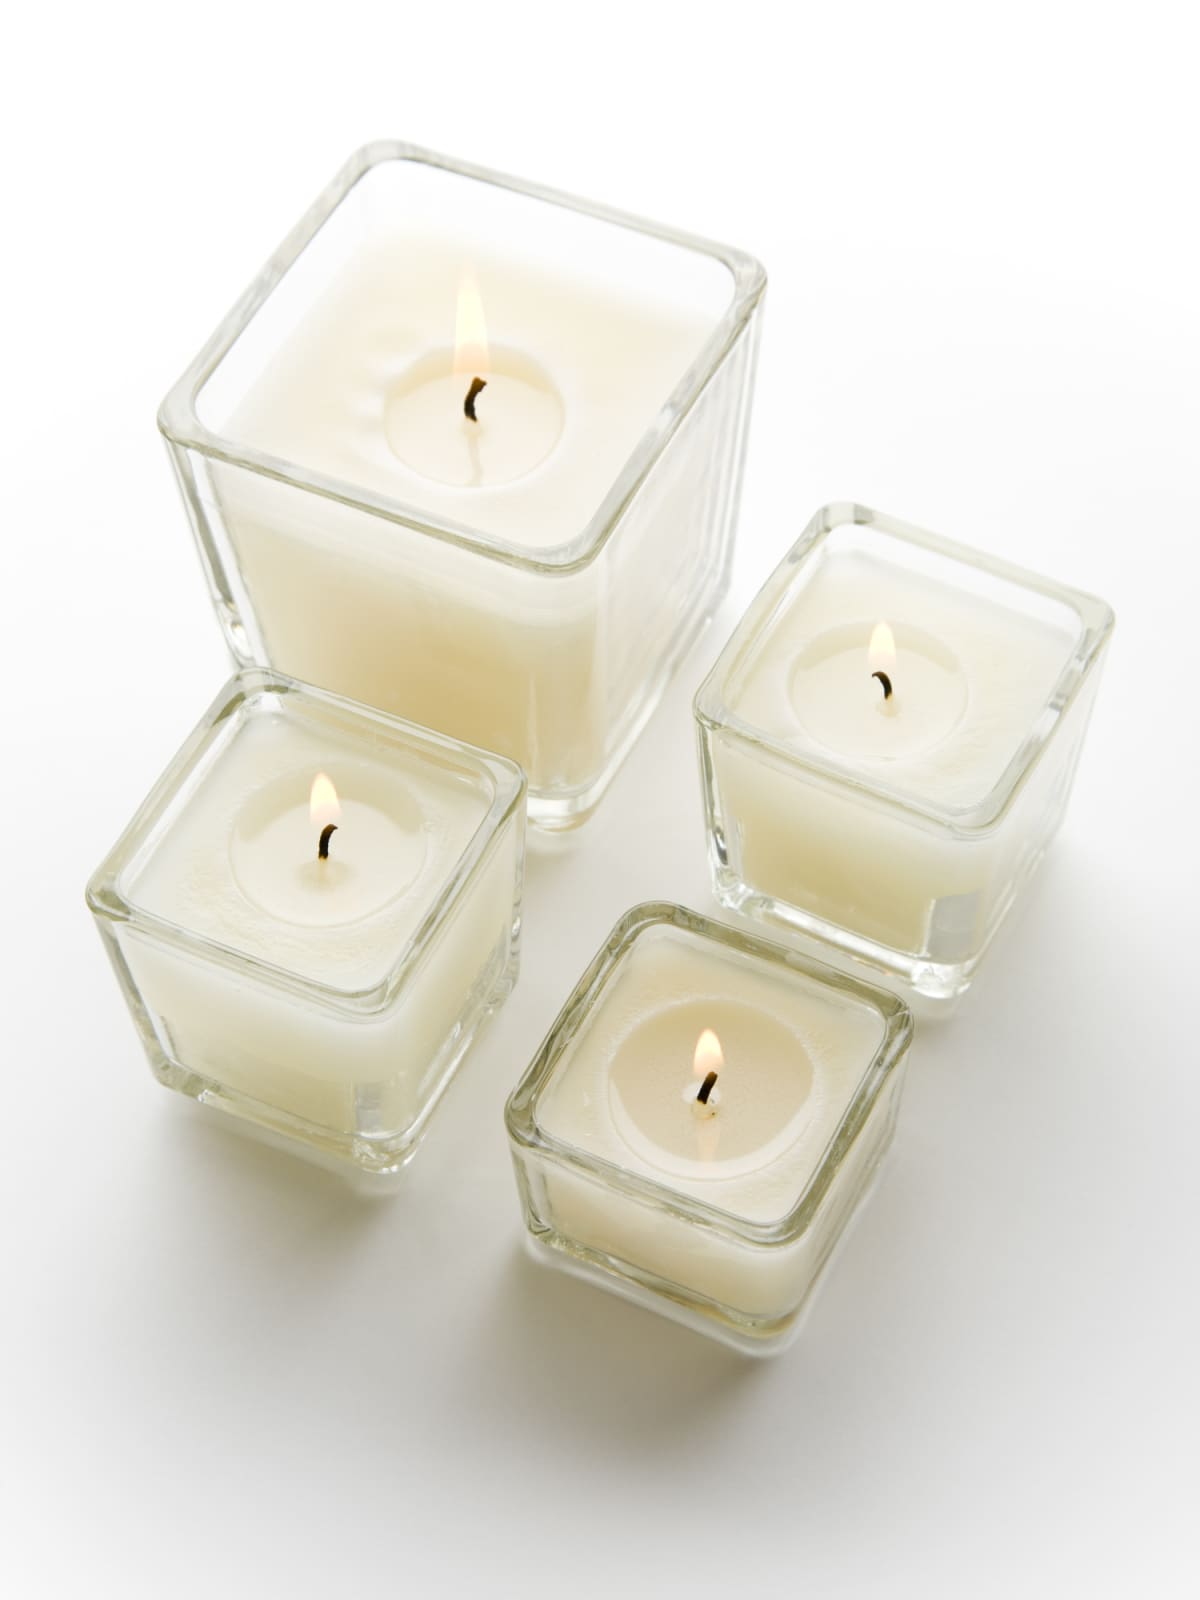 Three lit white candles in glass containers